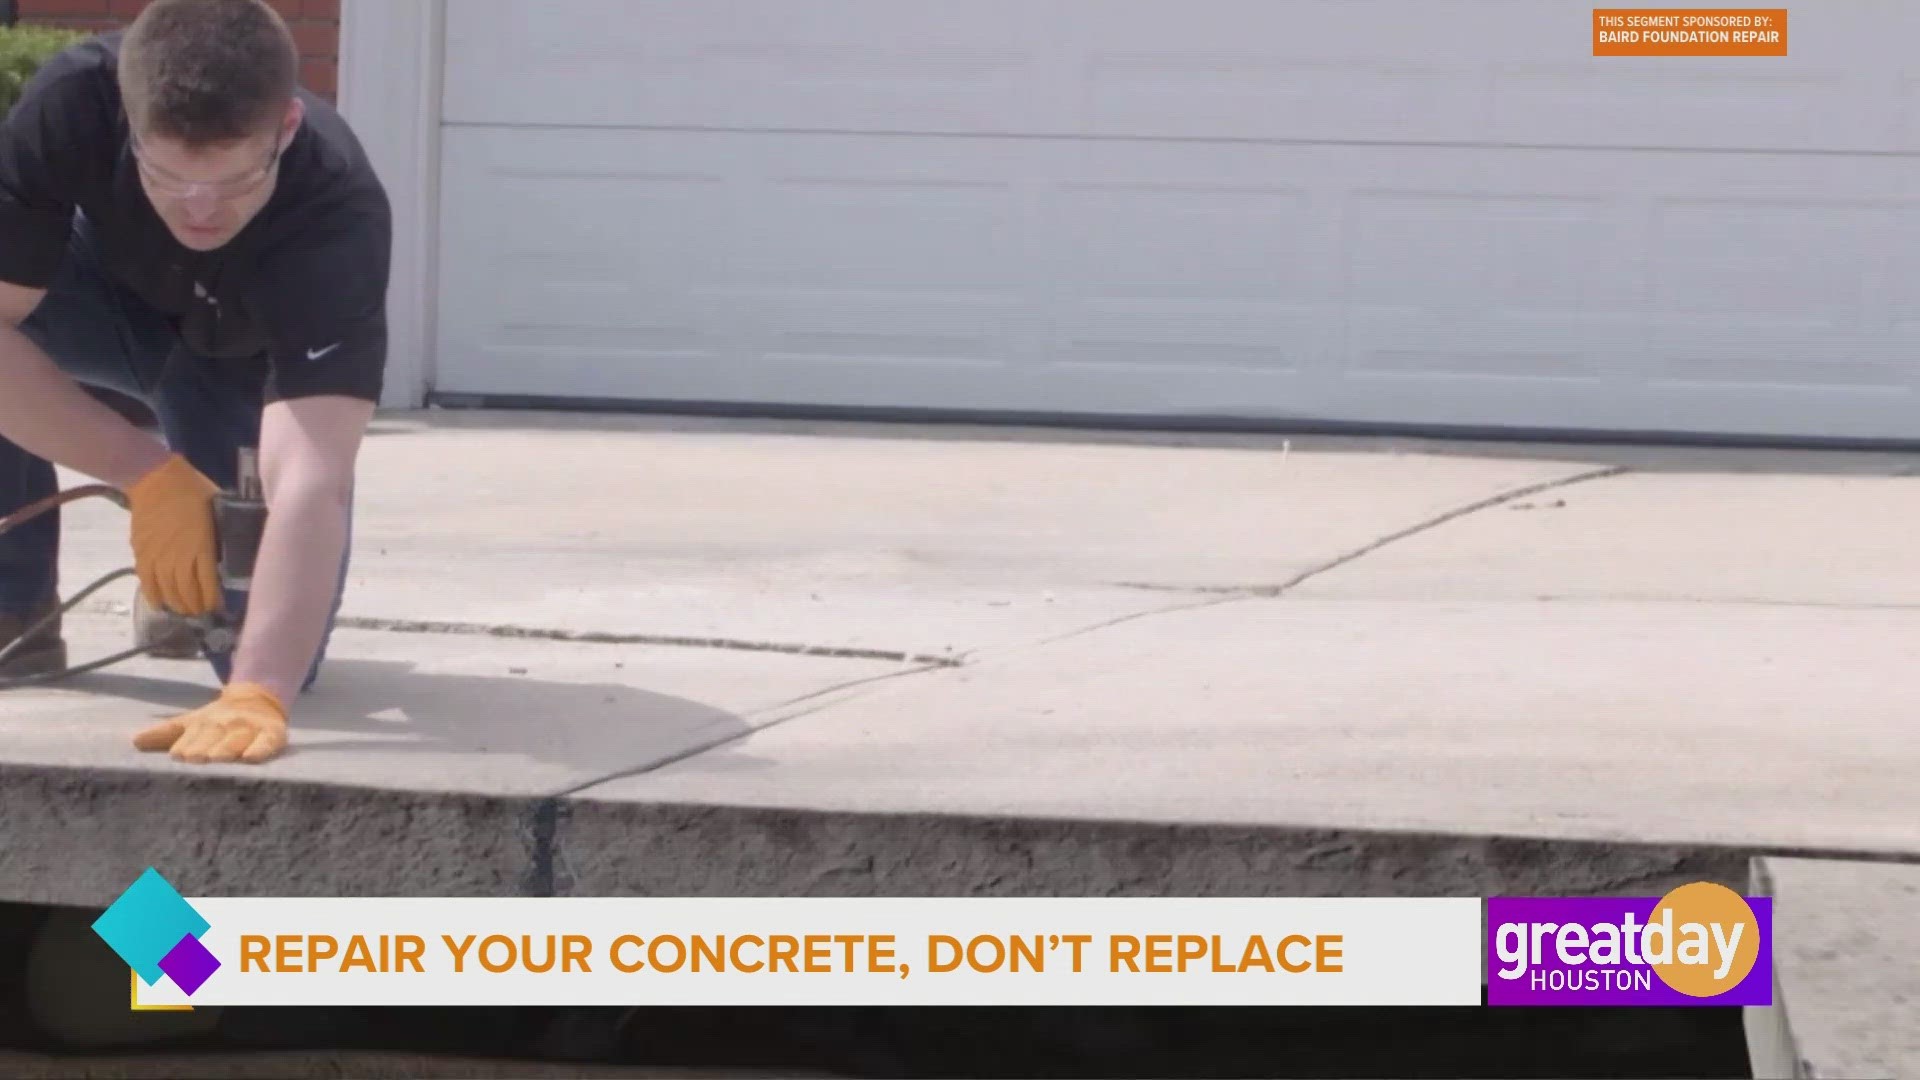 Baird Foundation Repair provides a long-term solution backed by a warranty so homeowners can save money repairing their concrete instead of replacing it.